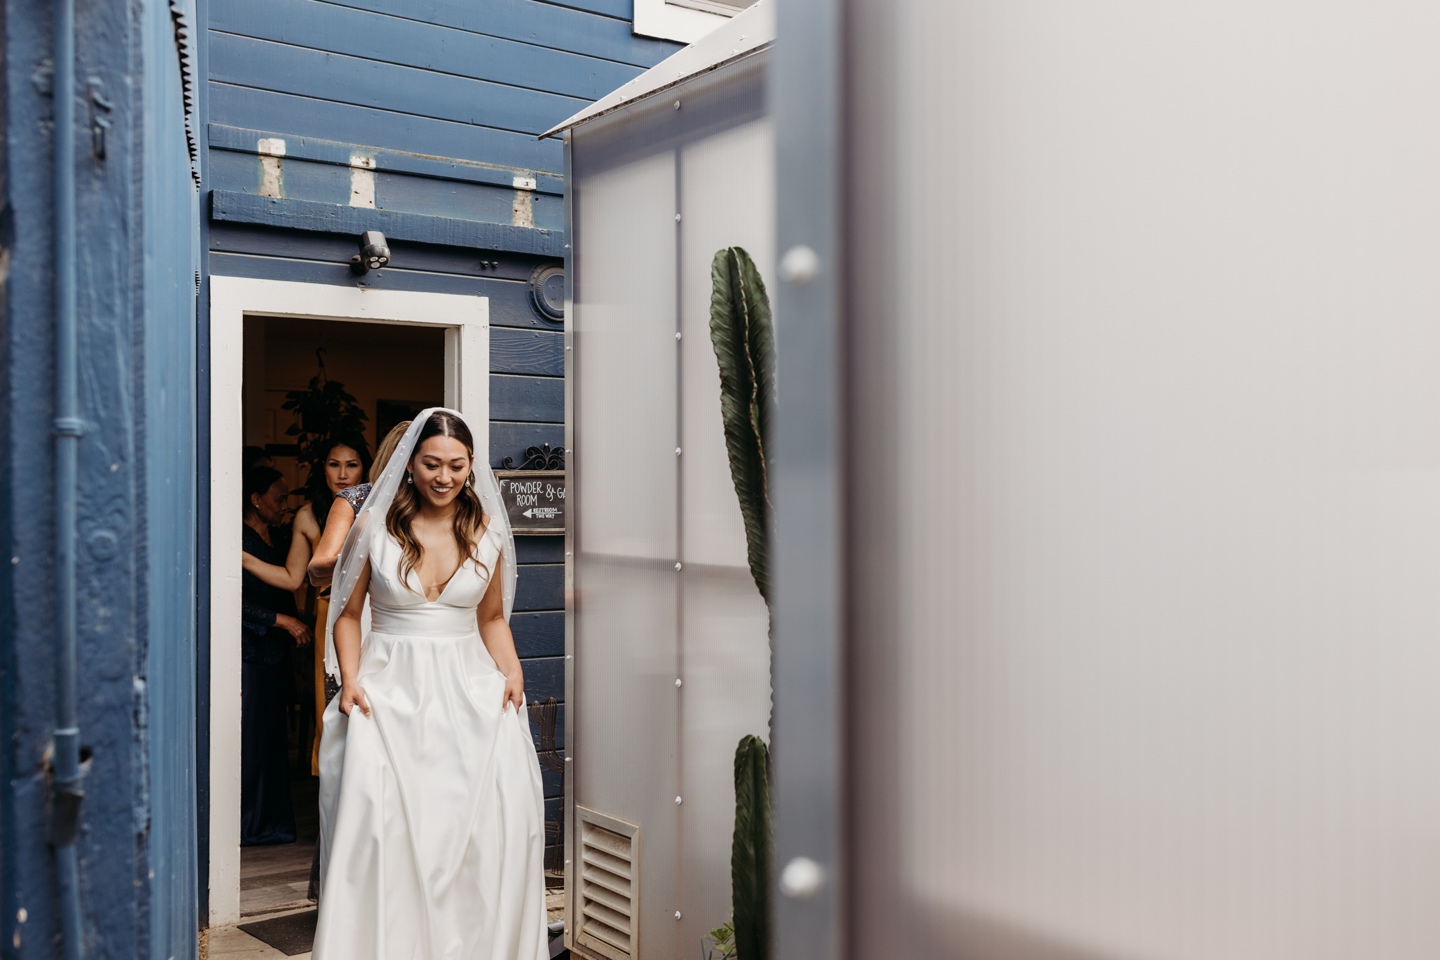 Bride walks out wearing her white wedding dress for her Prickly Pear wedding.